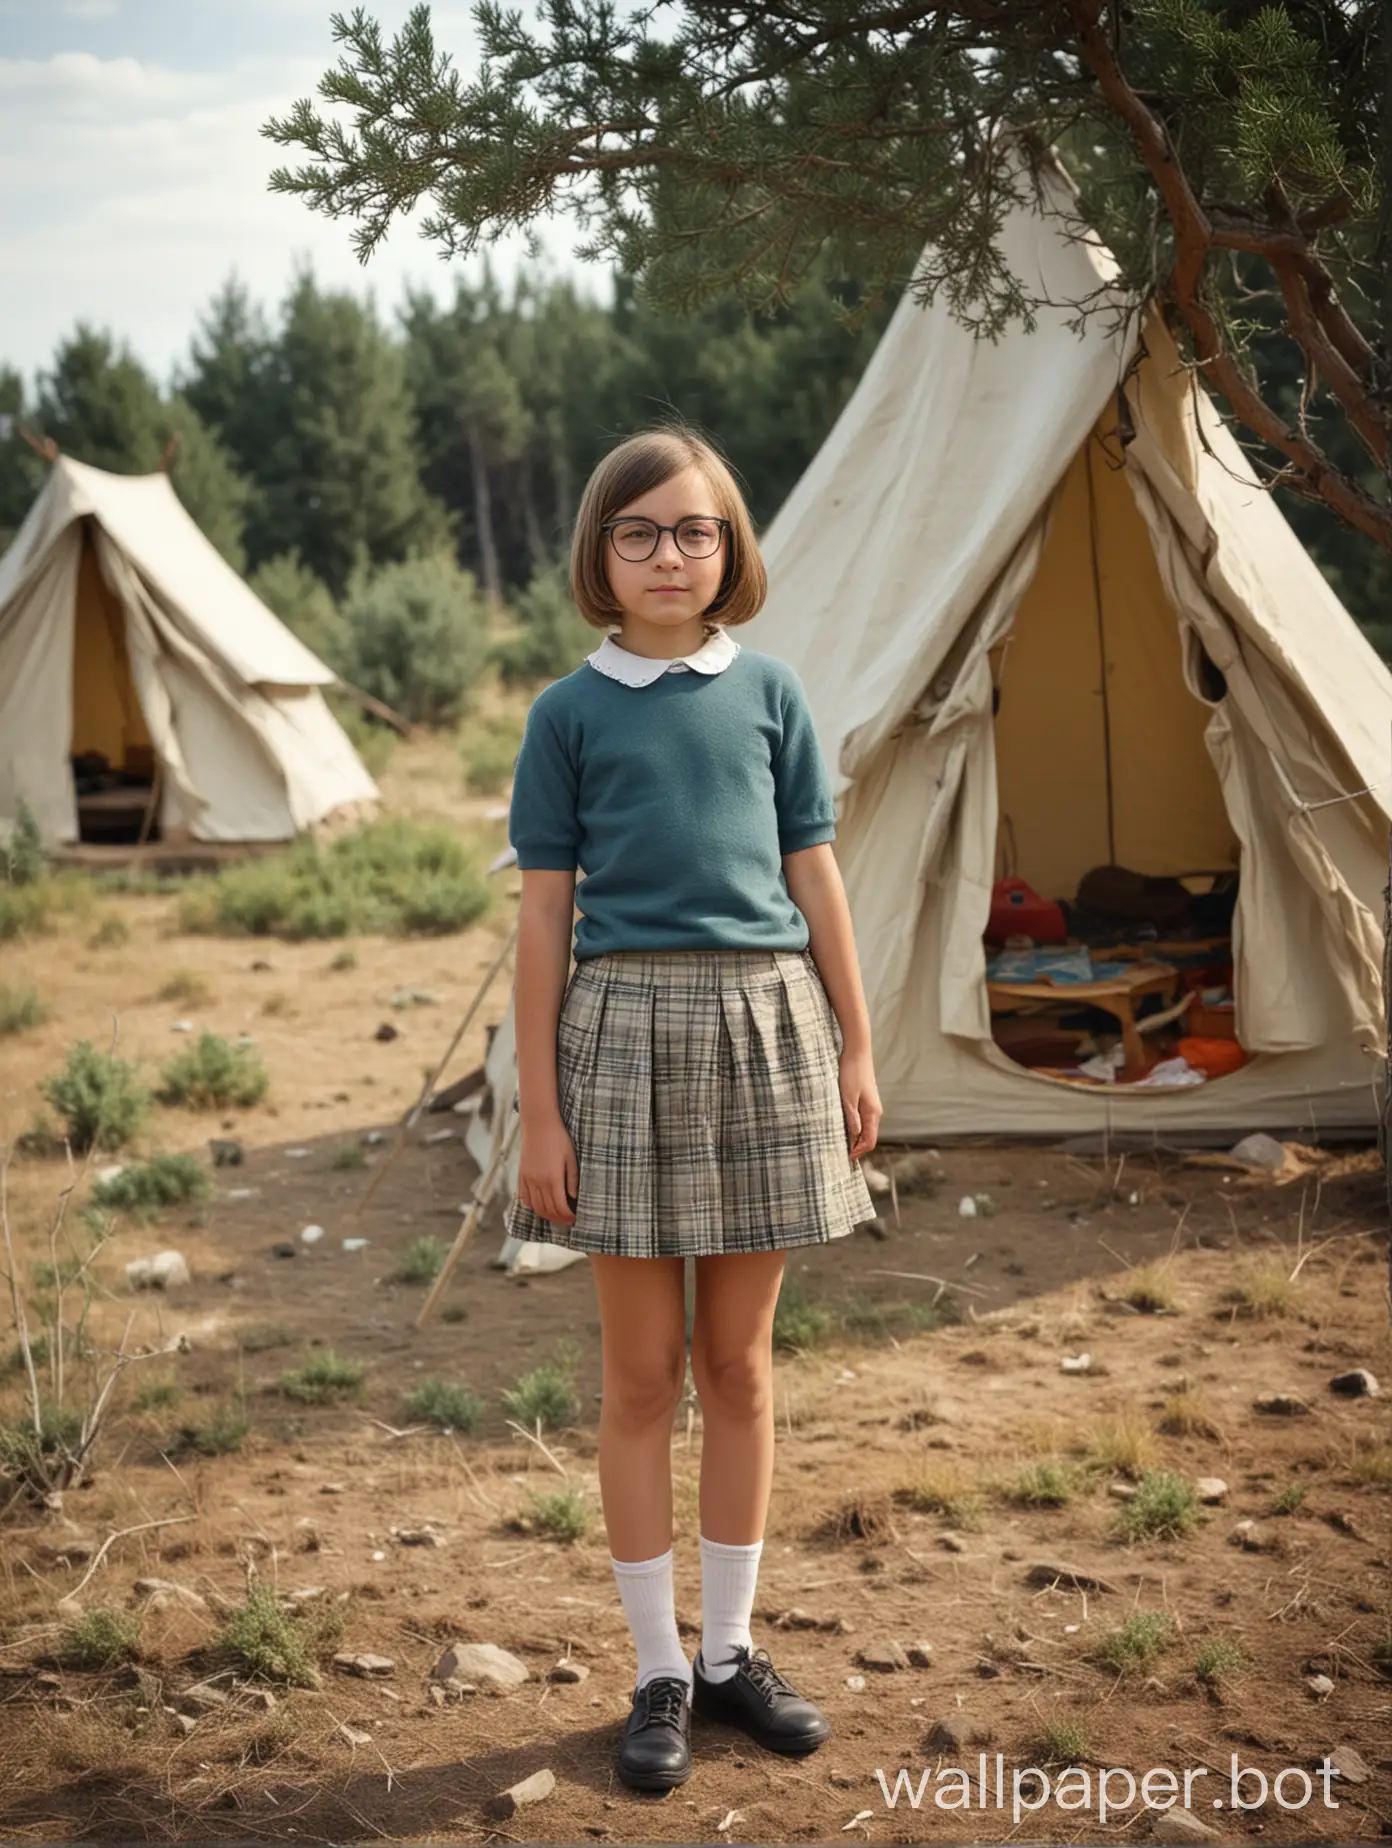 11-year-old girl with a bob, wearing glasses, a short skirt, full height, juniper, oak, tent, people in the distance